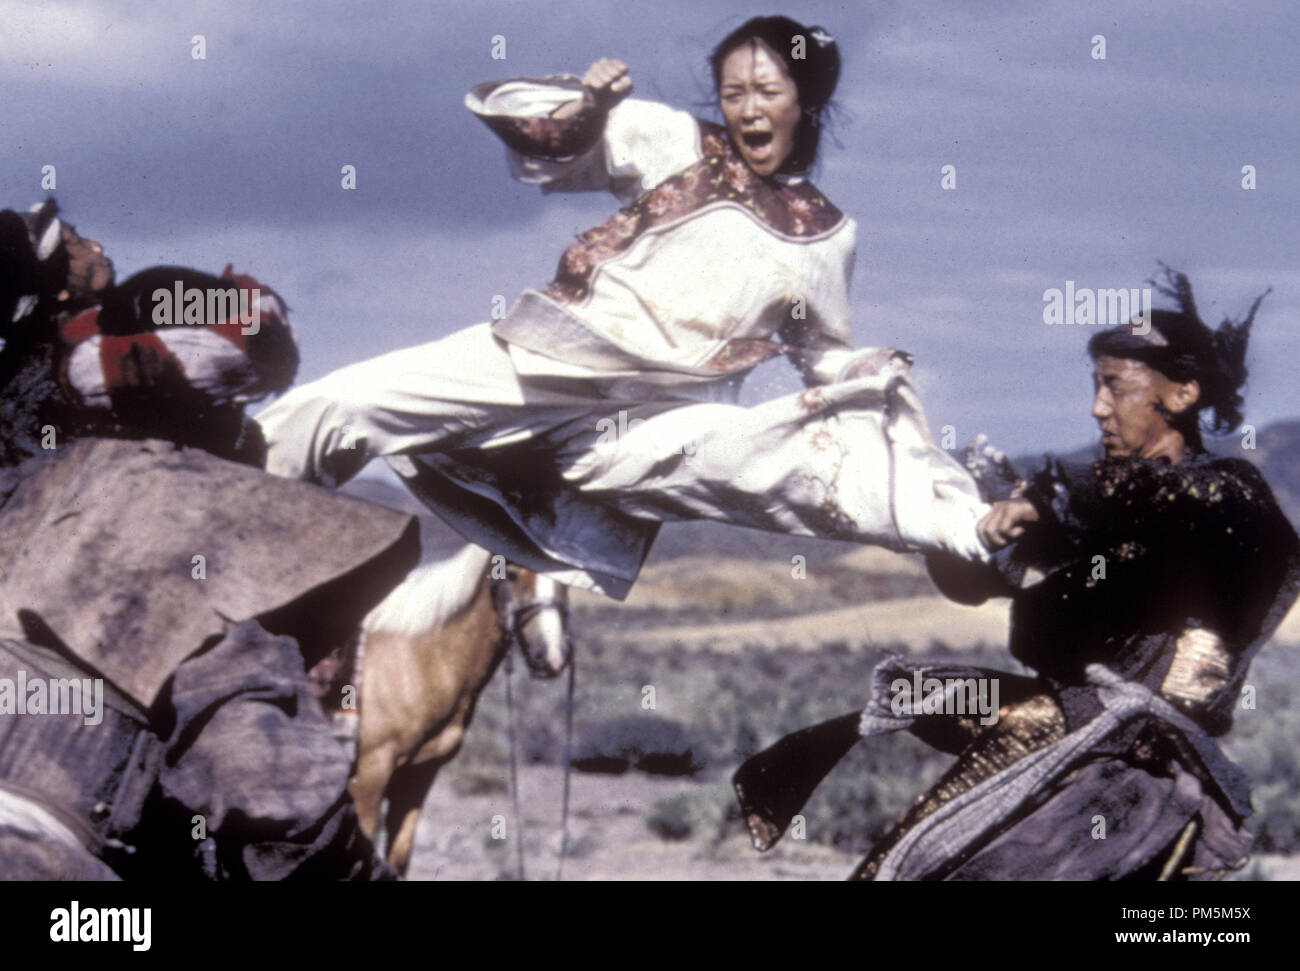 Film Still / Publicity Stills from 'Crouching Tiger, Hidden Dragon' Zhang Ziyi © 2000 Sony Pictures Classics Photo Credit: Chan Kam Chuen File Reference # 30846663THA  For Editorial Use Only -  All Rights Reserved Stock Photo